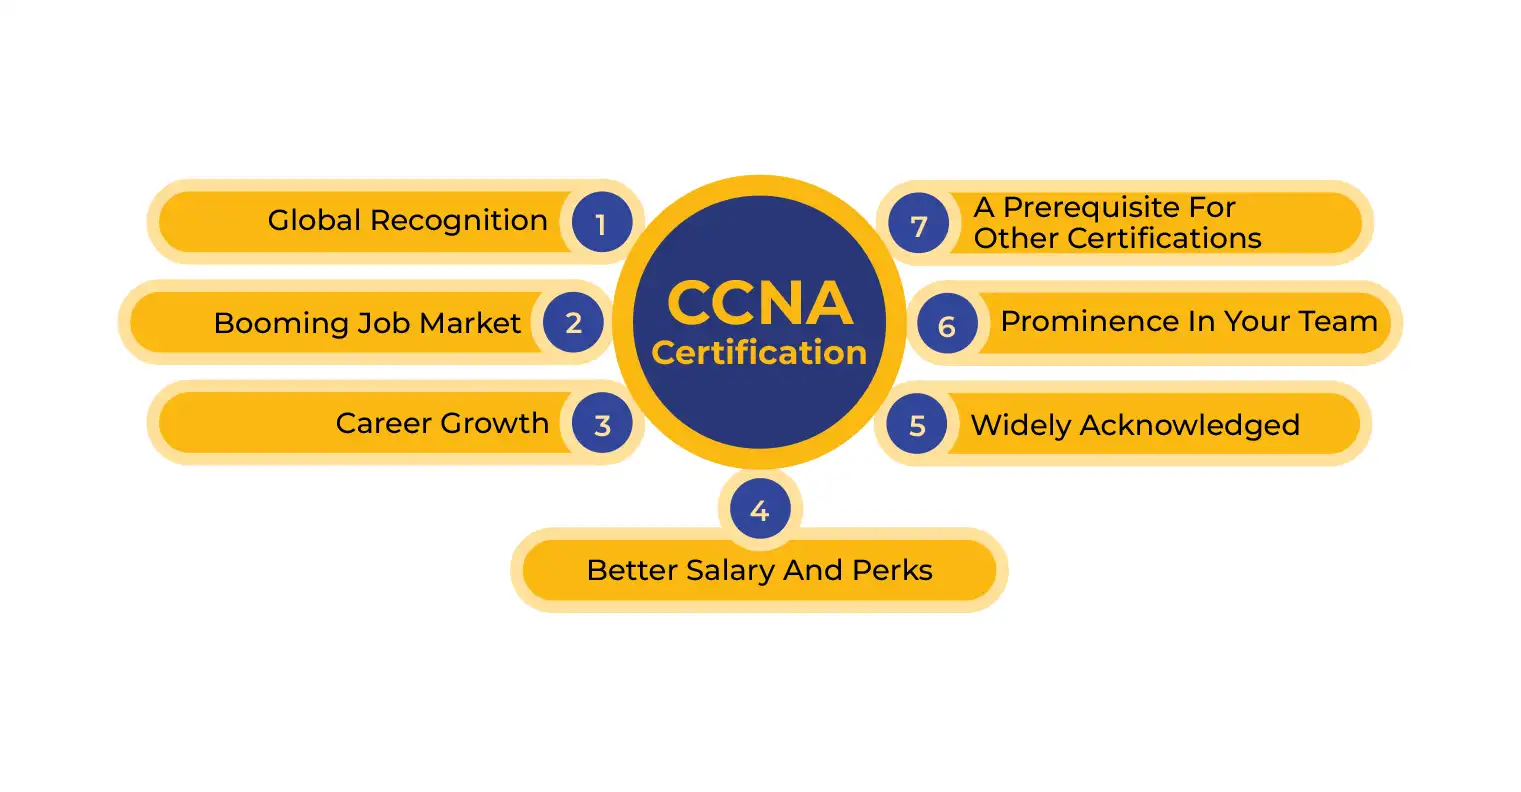 Diagram Shows the benefits of CCNA Certification